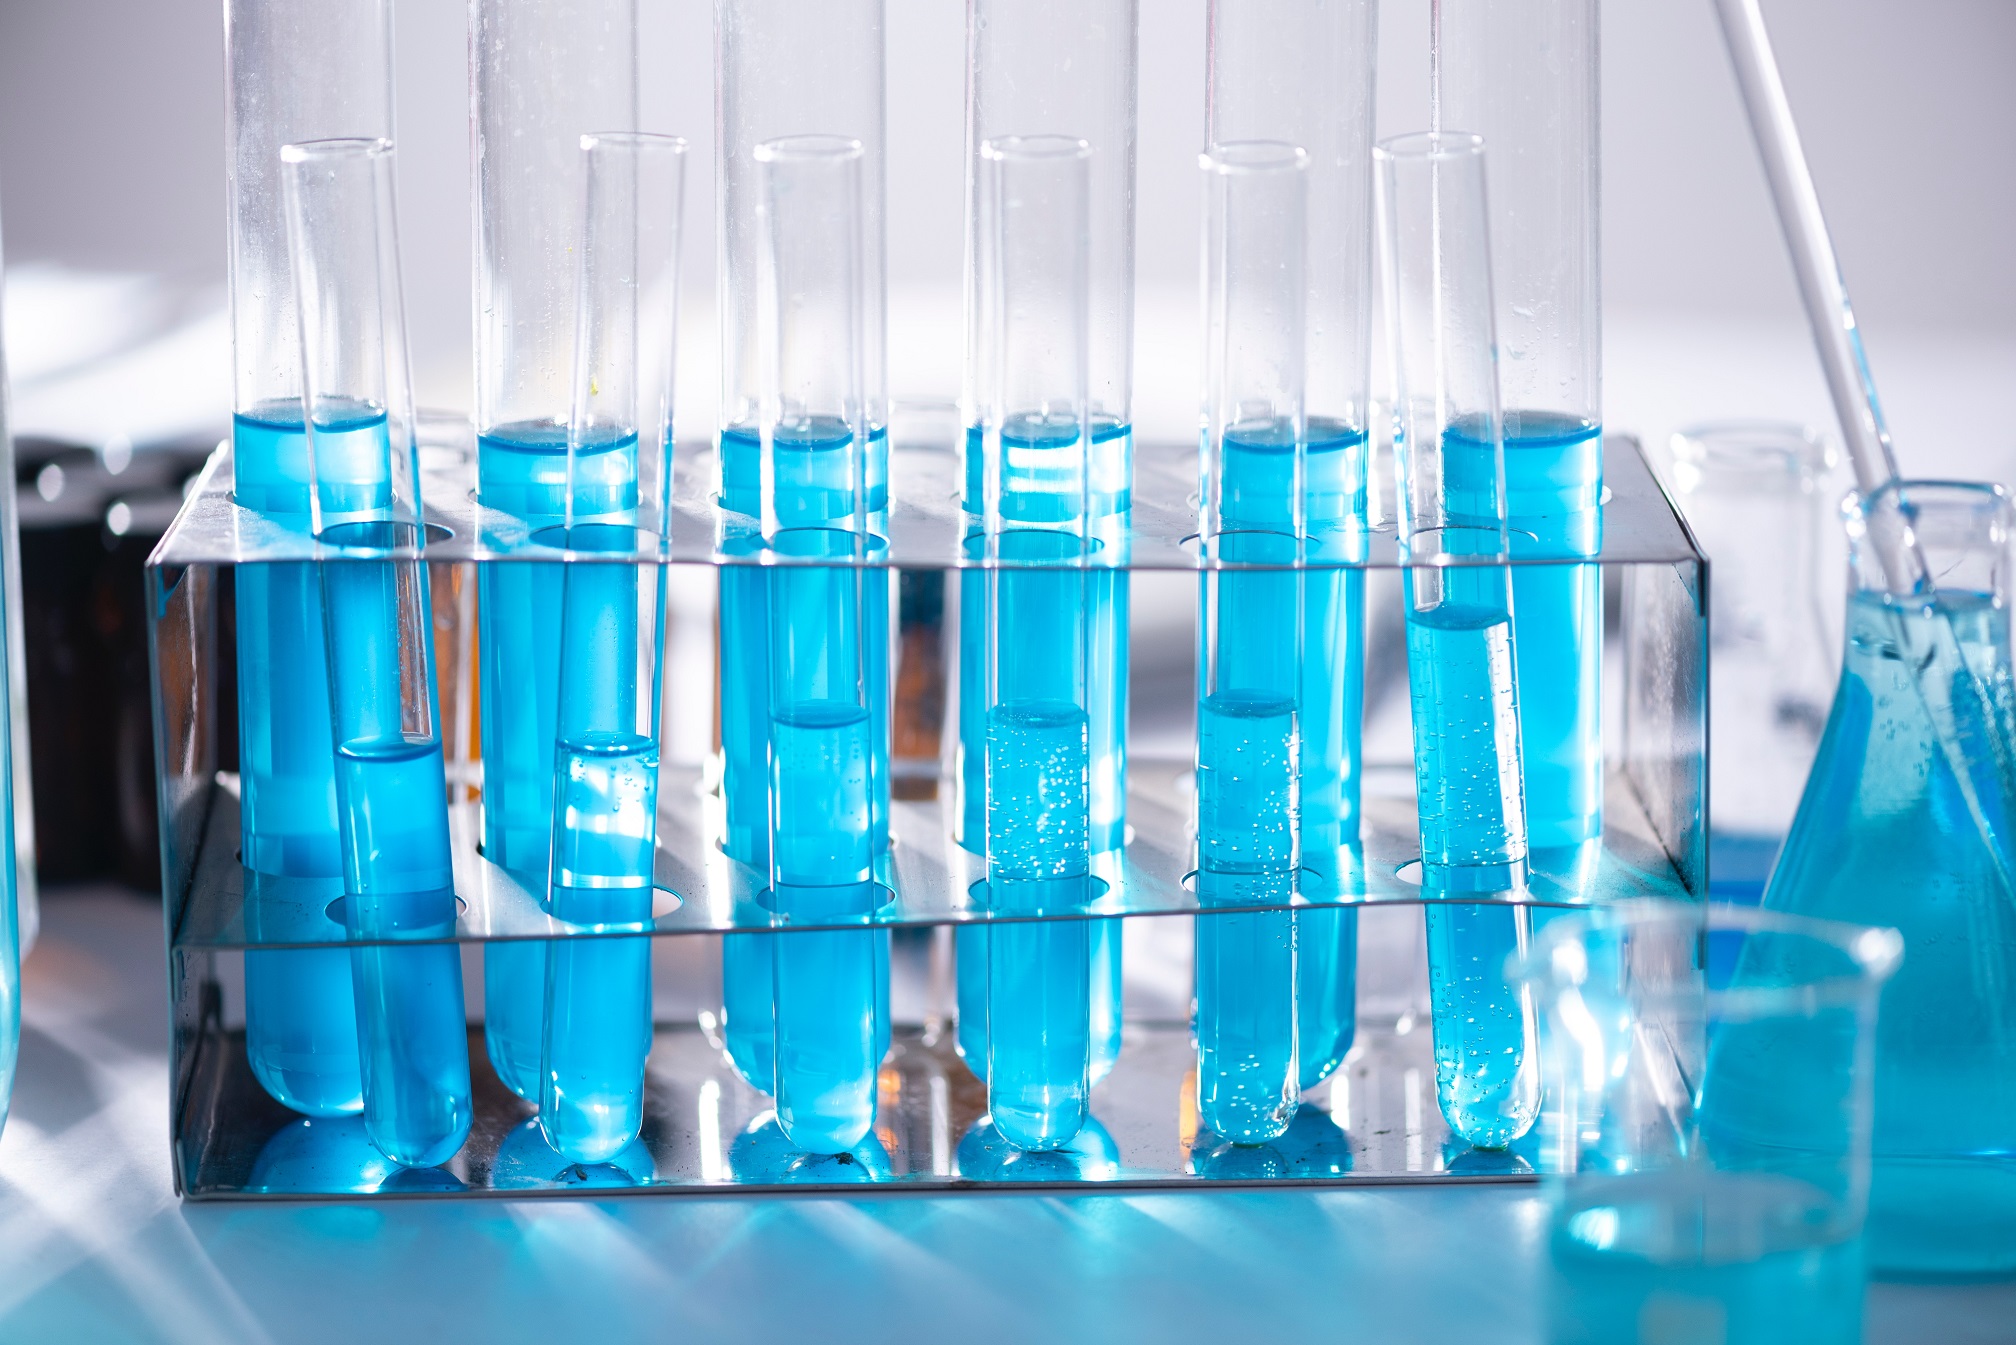 Vials of blue liquid are lined up on a lab table